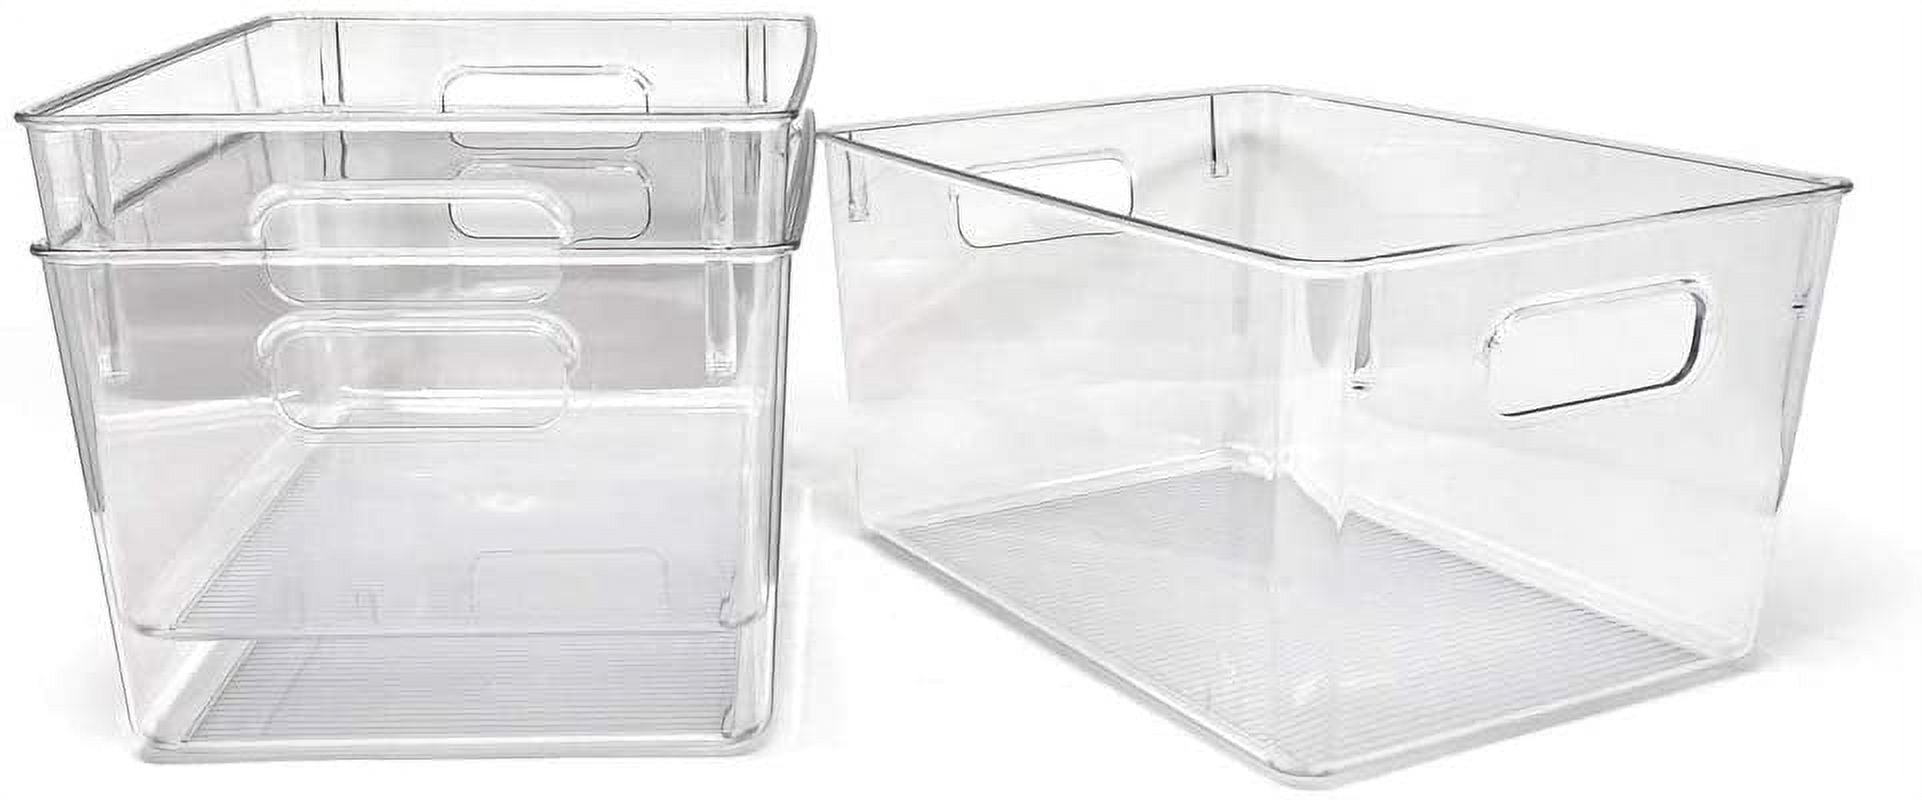 Isaac Jacobs Stackable Organizer Bin w/ Hinged Lid, Clear Storage Box, –  Isaac Jacobs International